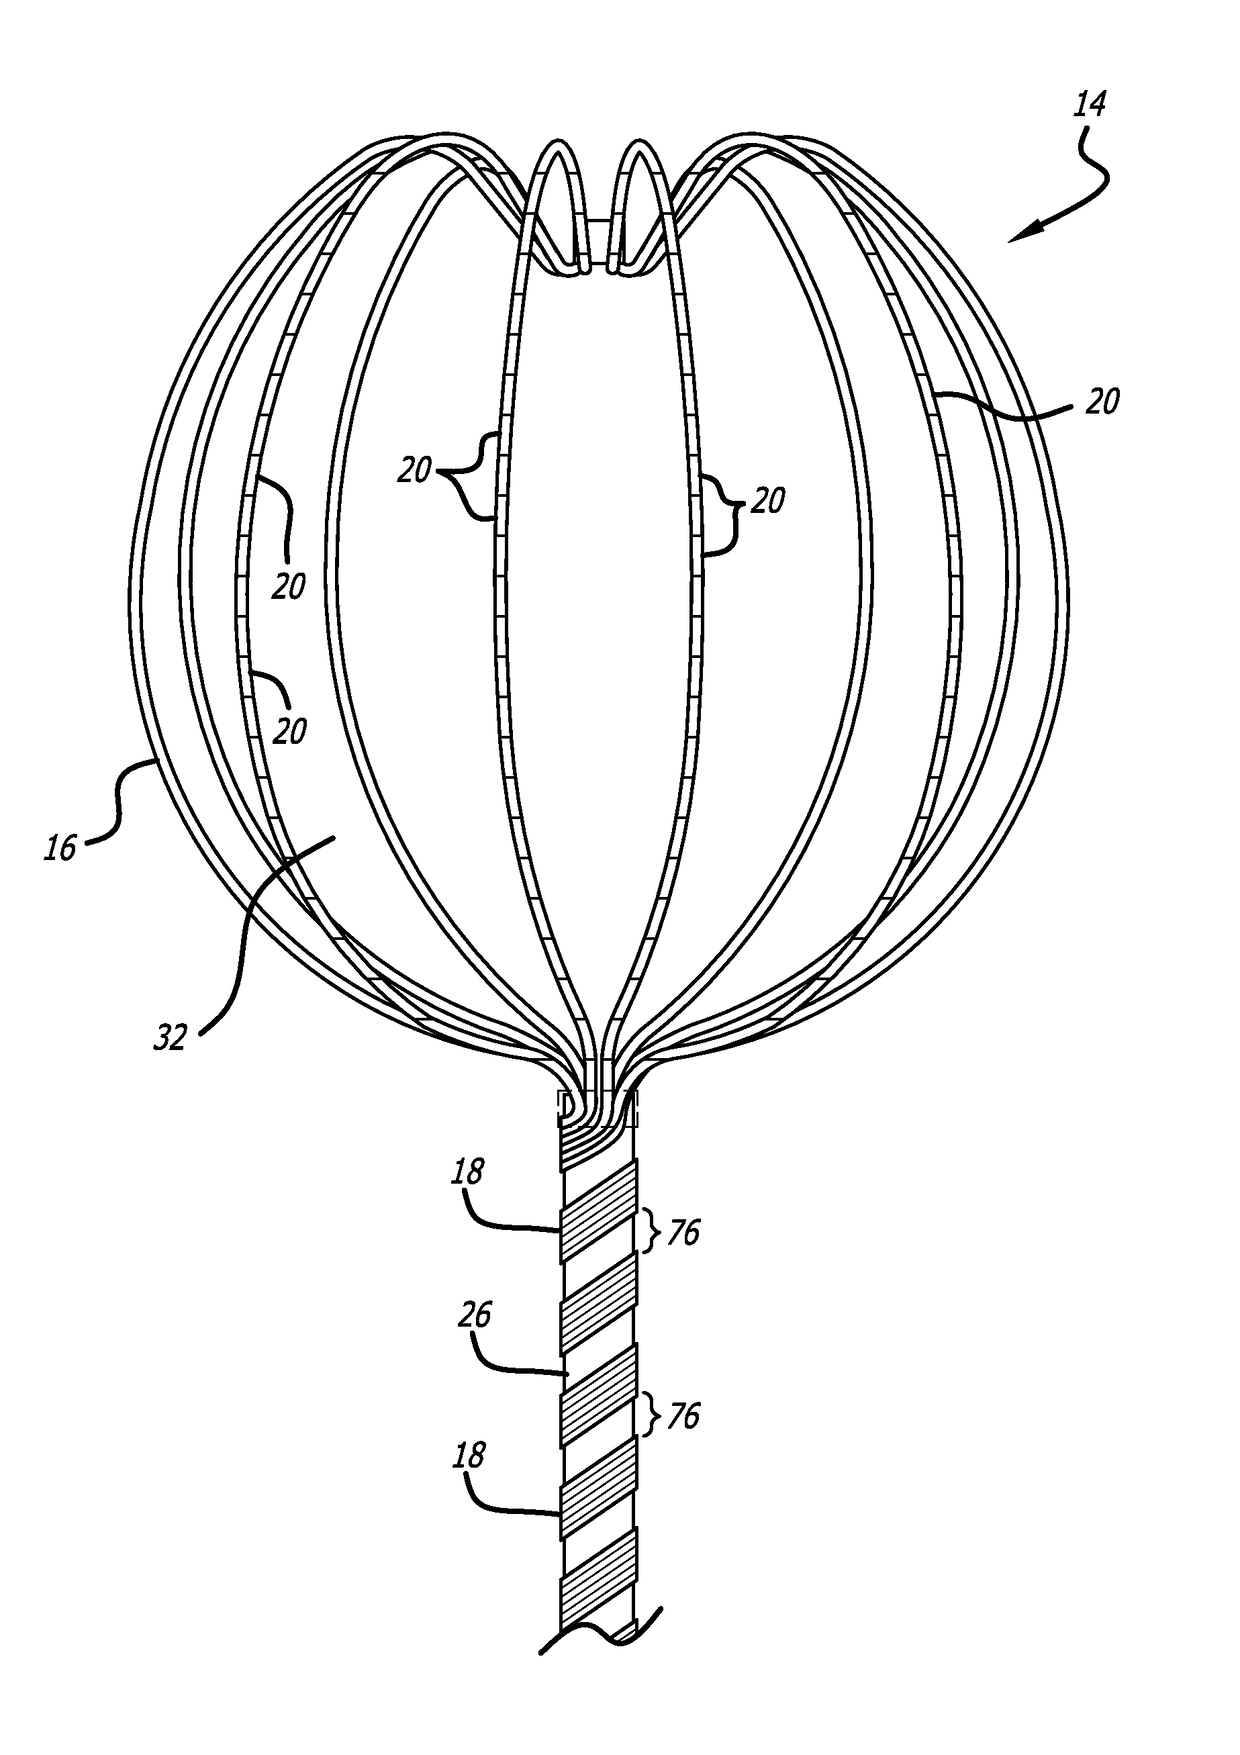 Multi-electrode mapping catheter